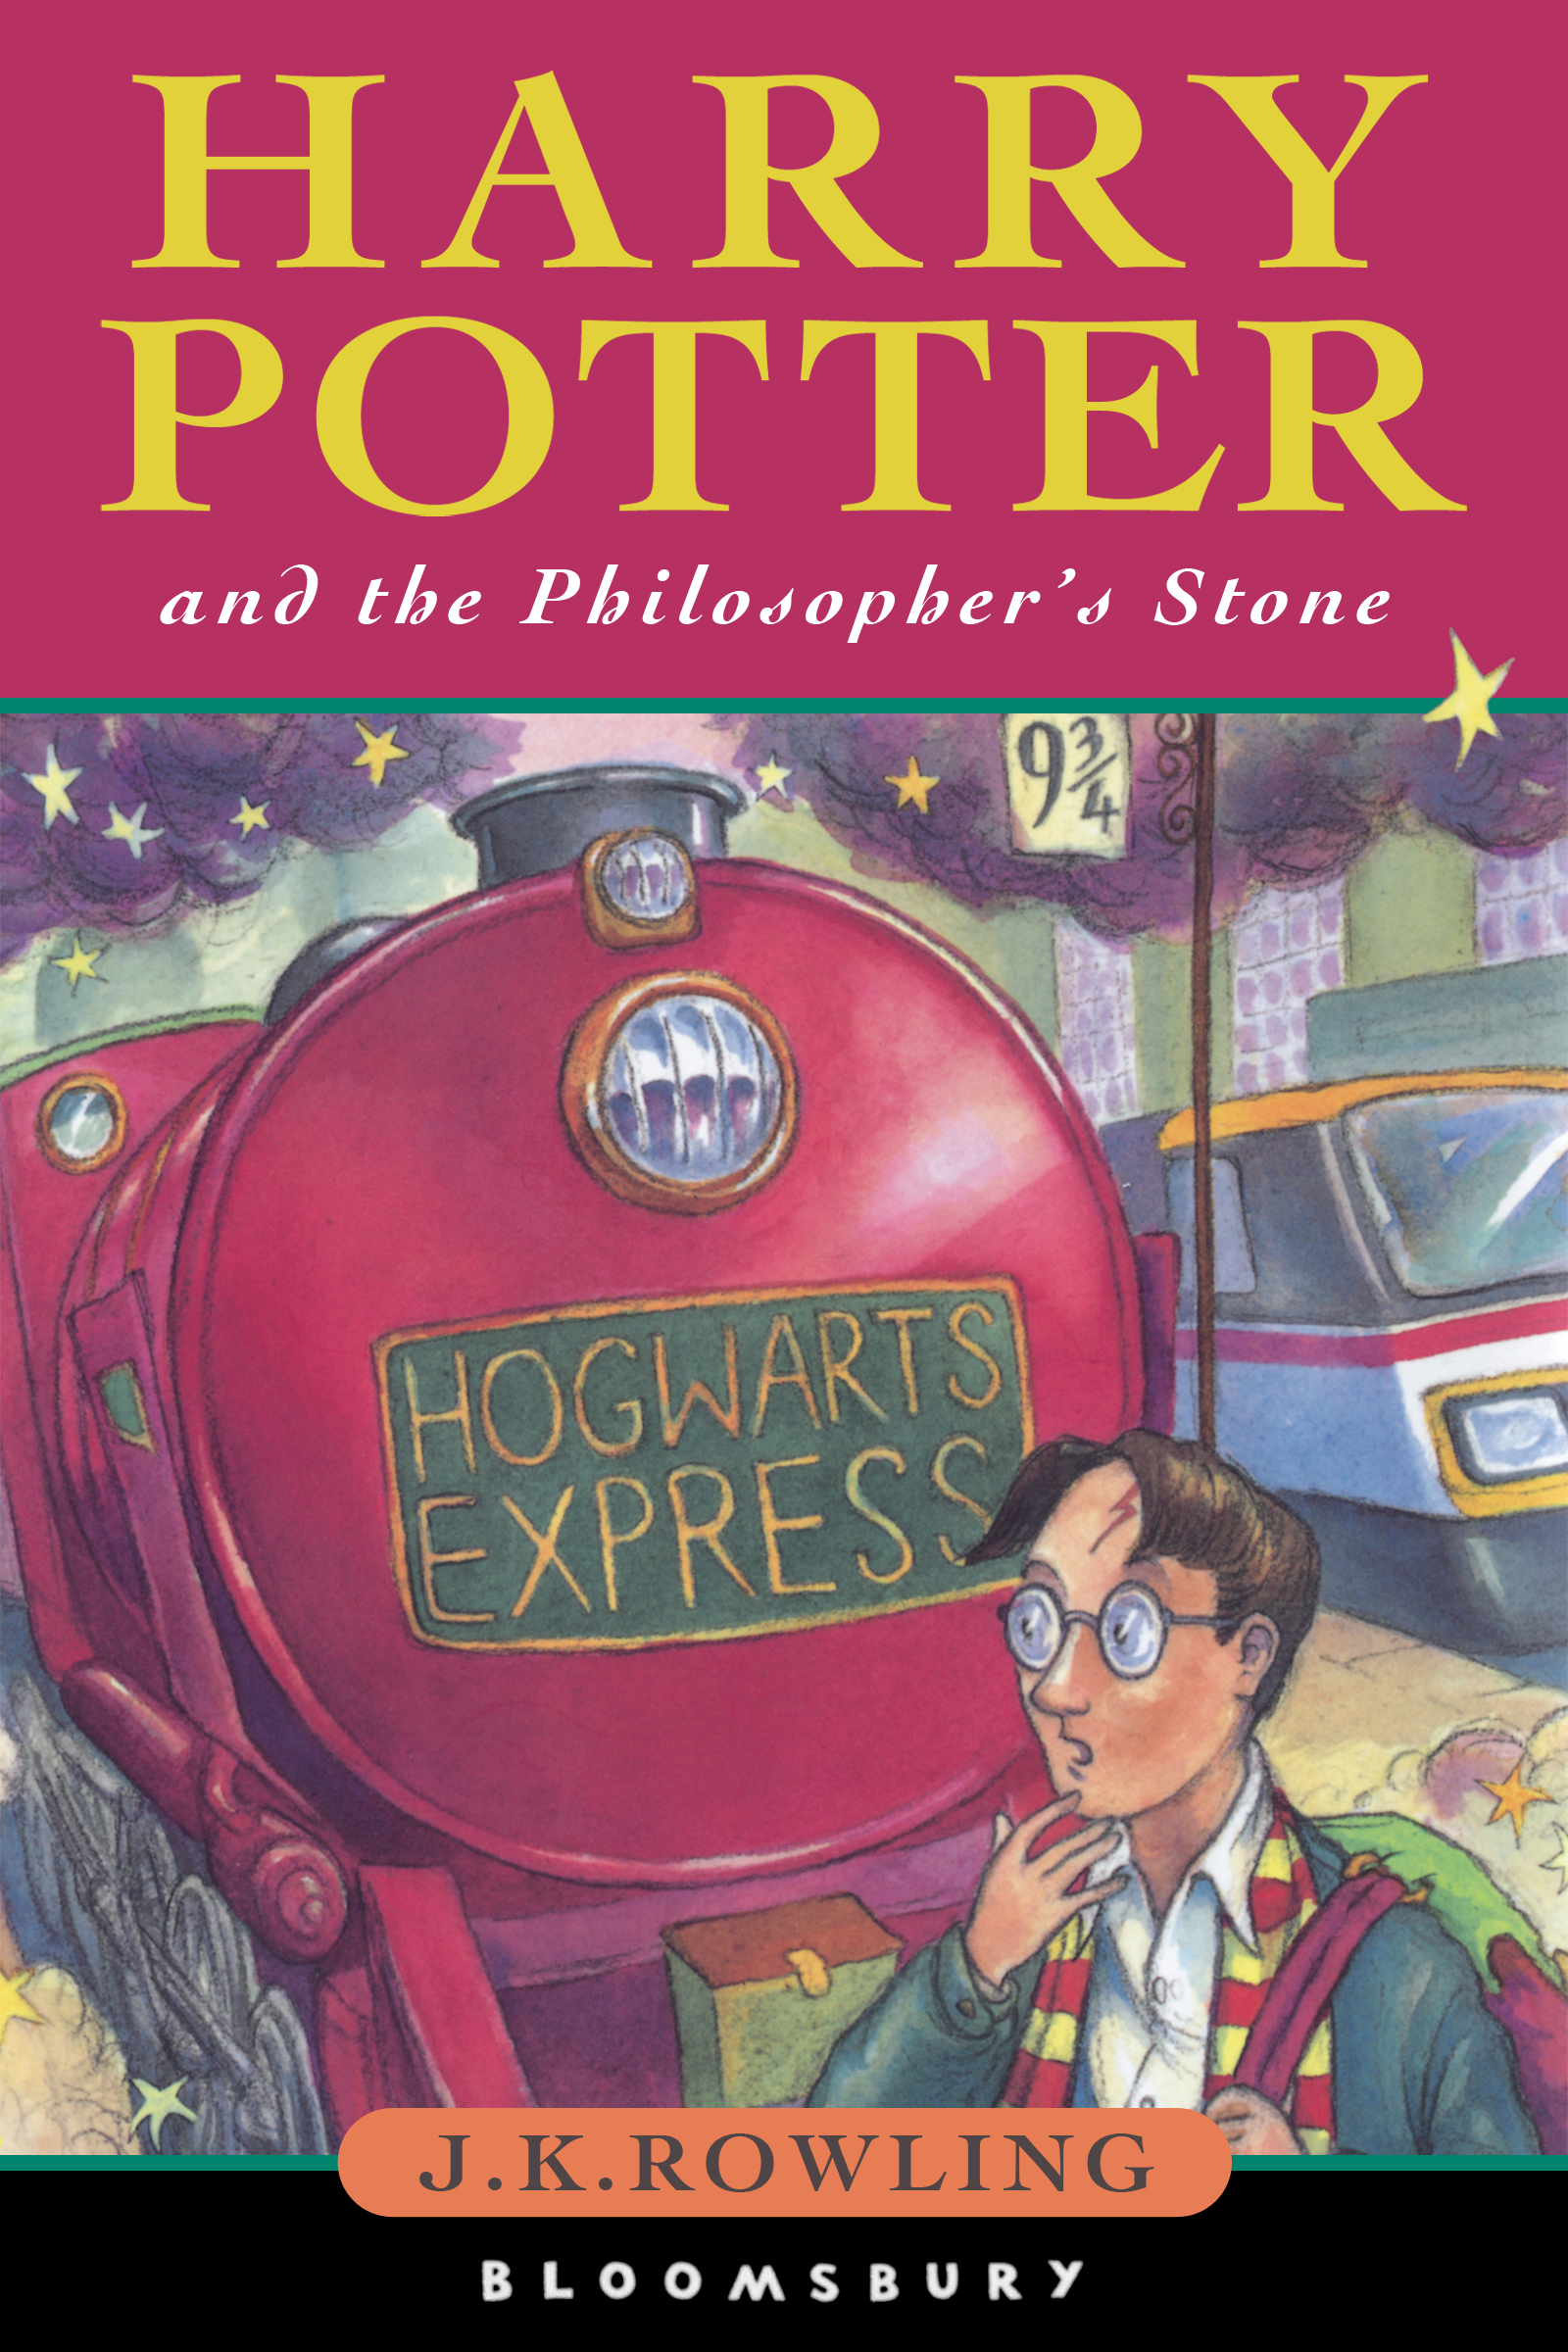 Writing for all ages - Harry Potter book cover